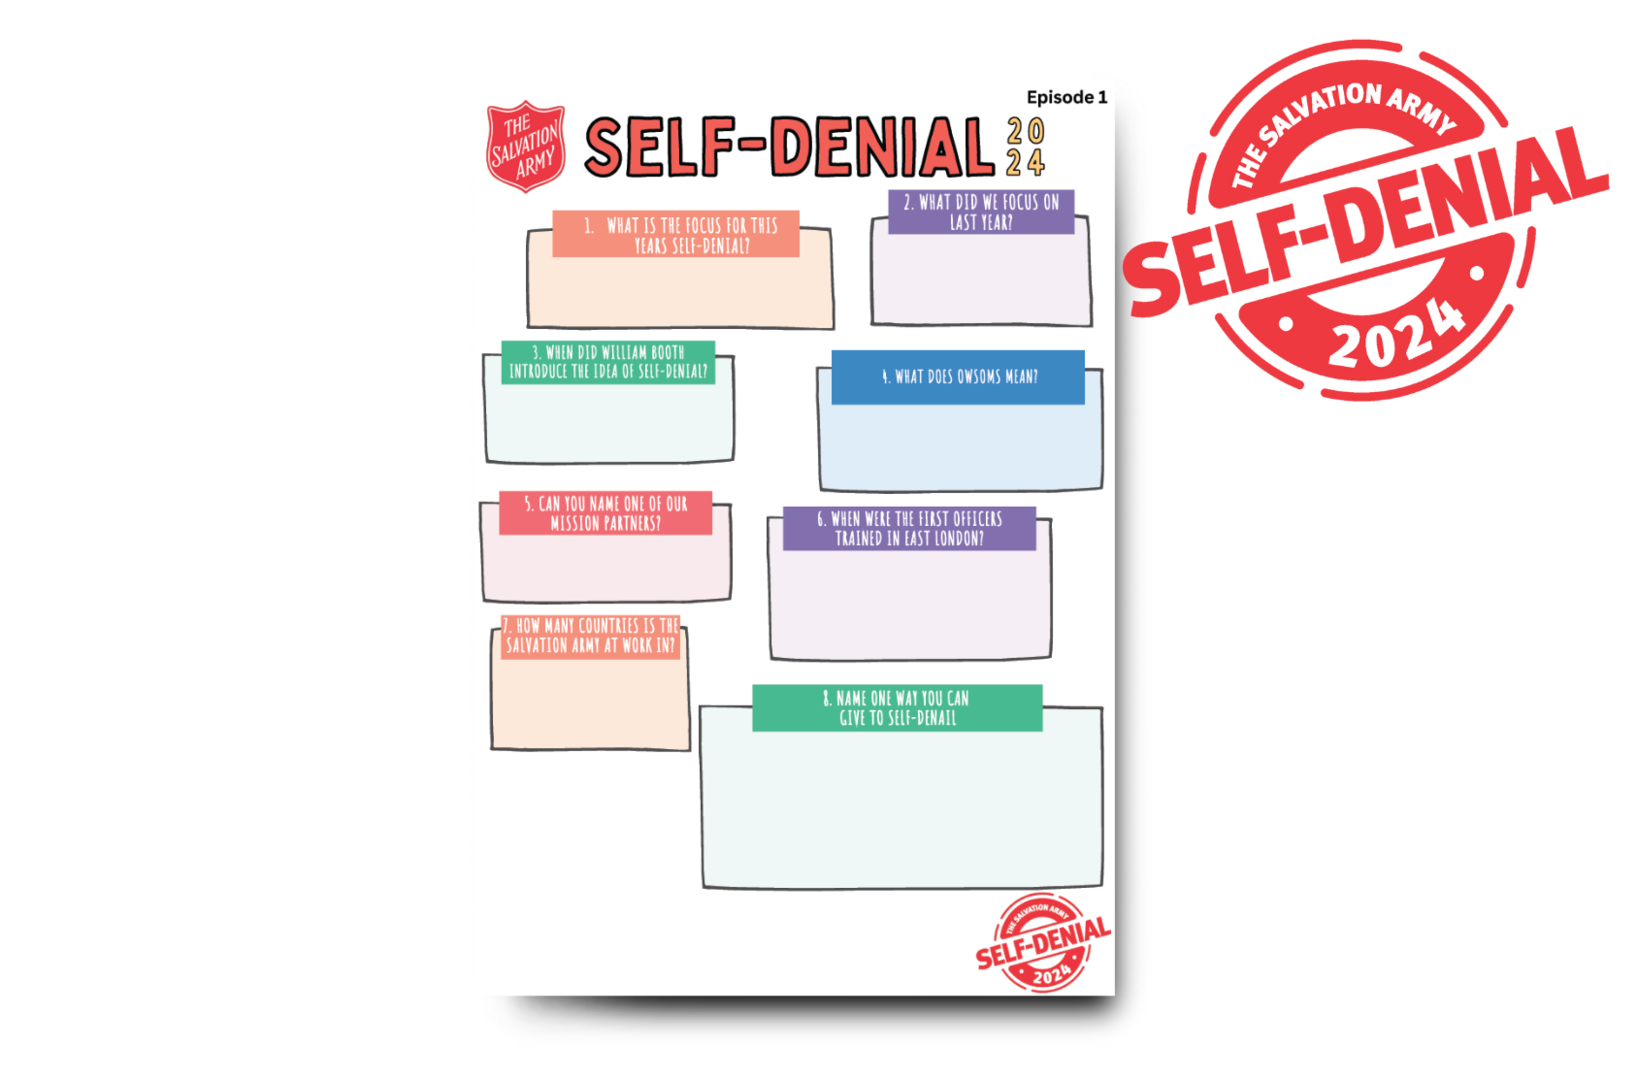 Self-Denial logo with the video activity sheet